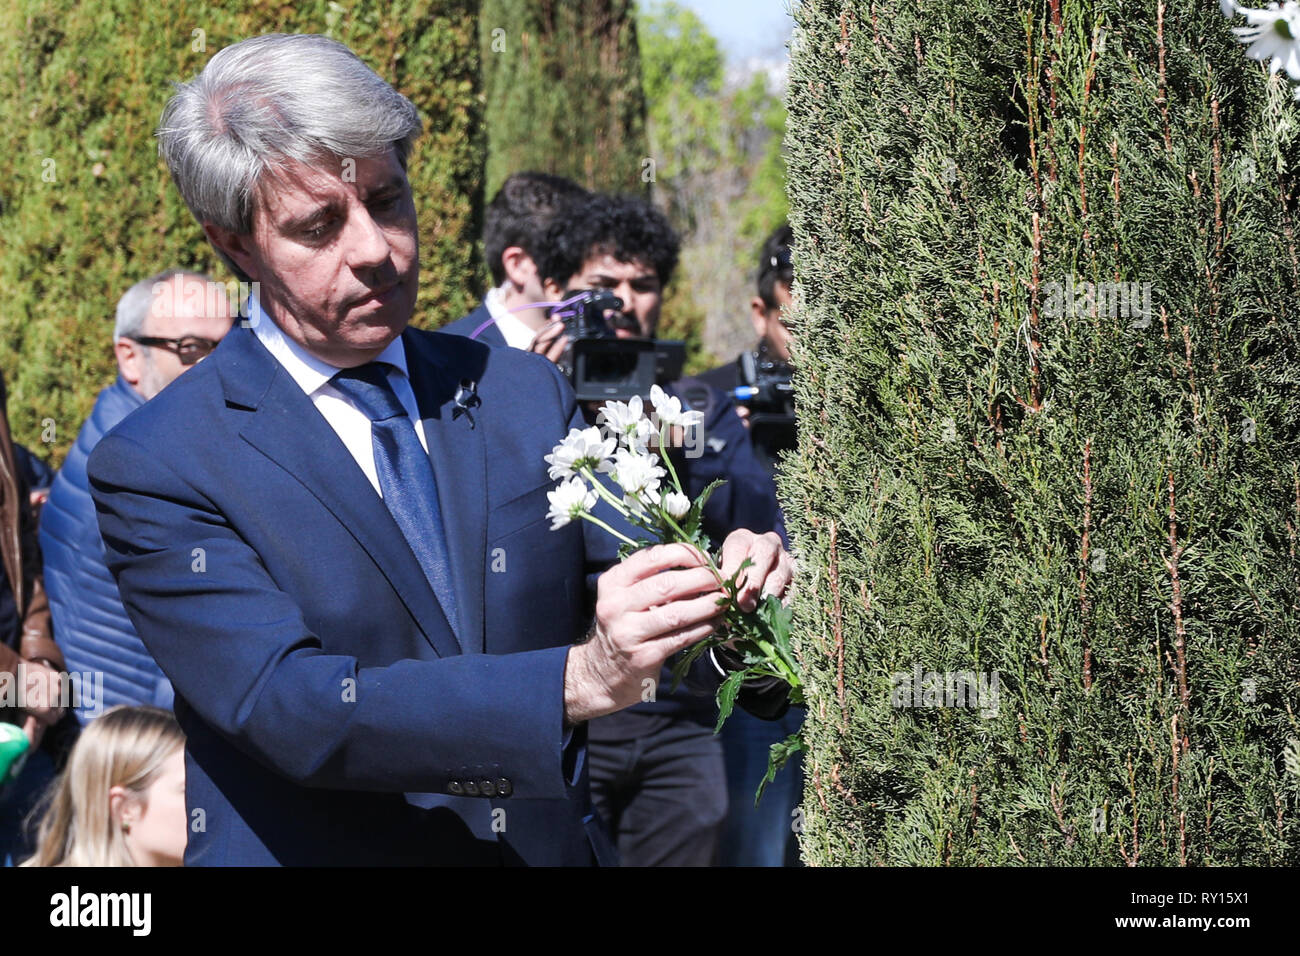 Madrid, Spain. 11th Mar 2019. Angel Garrido seen attending the event of the The Association of Victims of Terrorism (AVT) in the El Retiro Park in memory of the victims of the attacks of March 11, 2004. Credit: Jesús Hellin/Alamy Live News Stock Photo